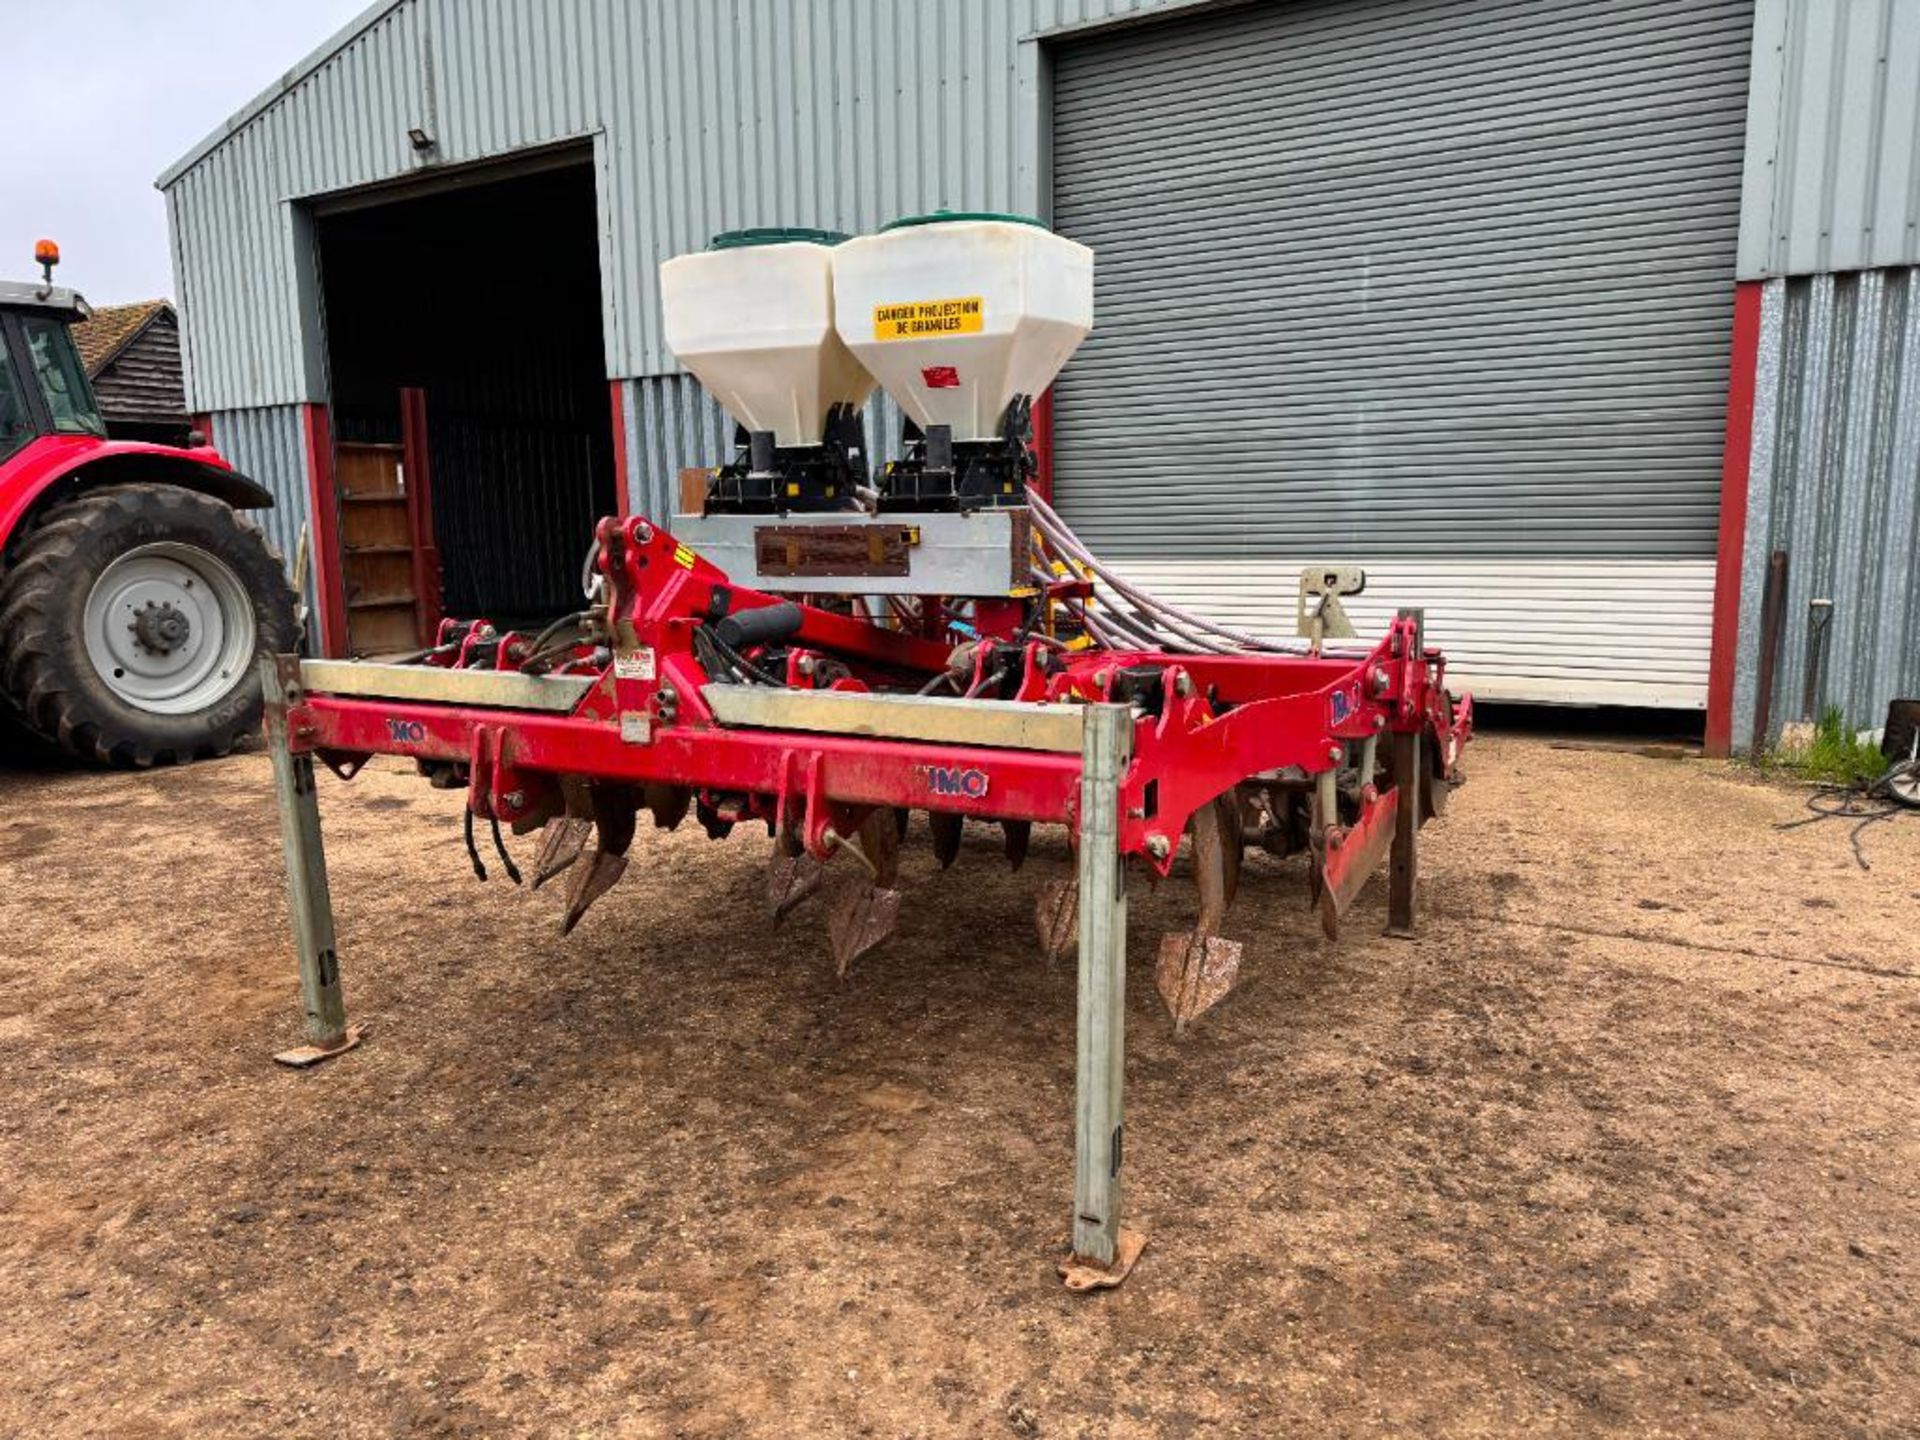 Sumo Trio 3 3m cultivator with 6 hydraulic auto-reset subsoiler legs, 2 rows discs and rear packer w